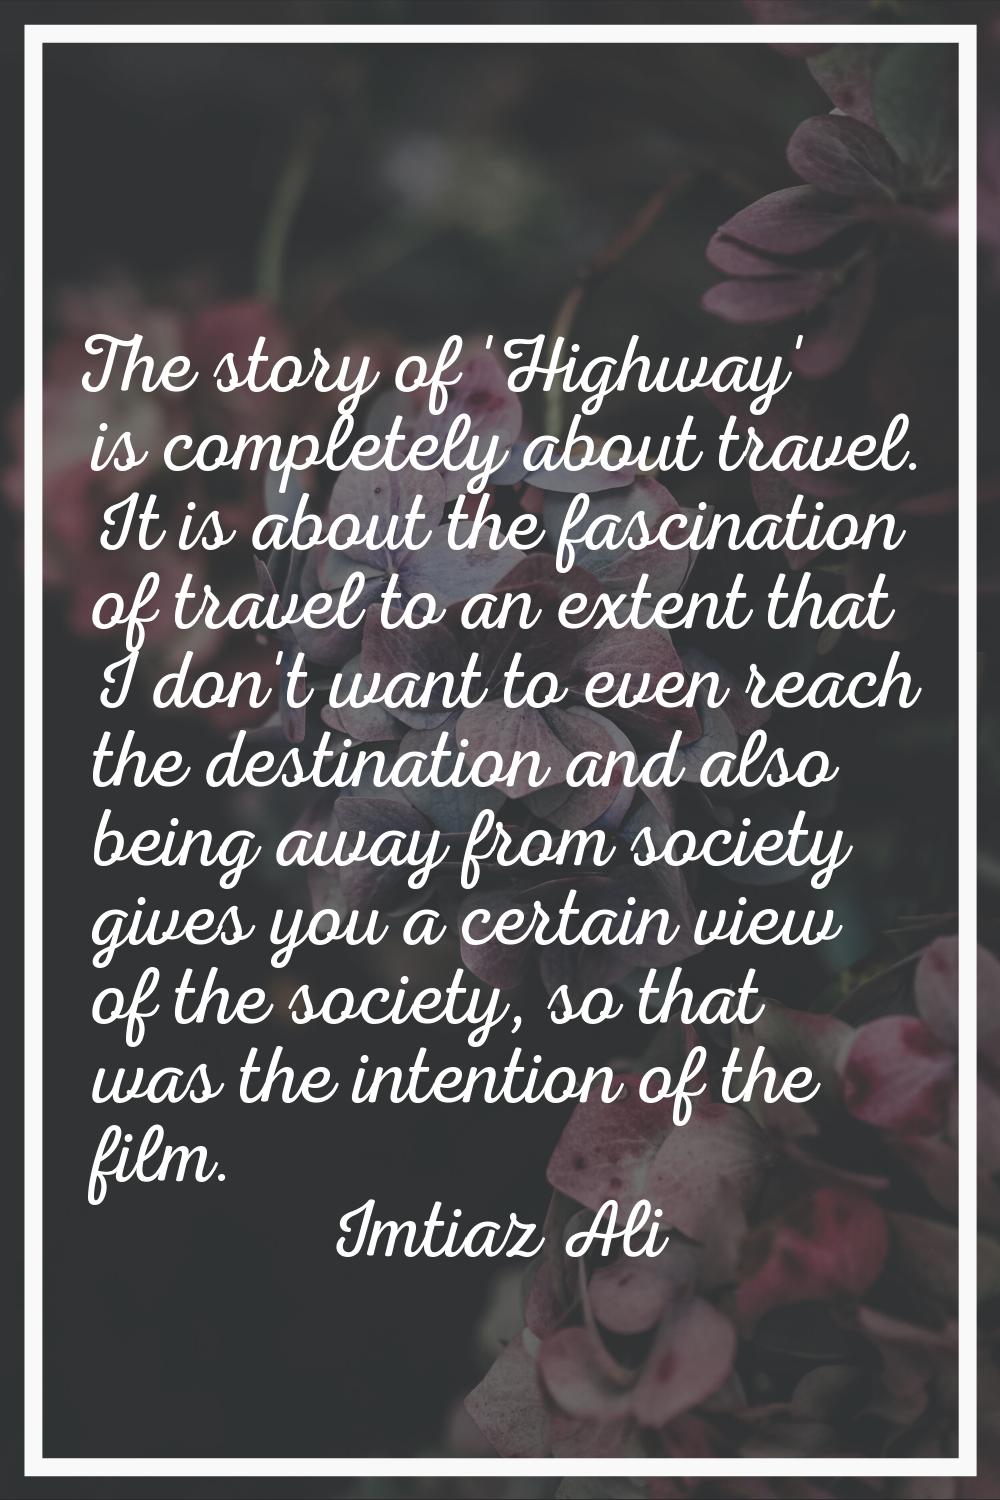 The story of 'Highway' is completely about travel. It is about the fascination of travel to an exte